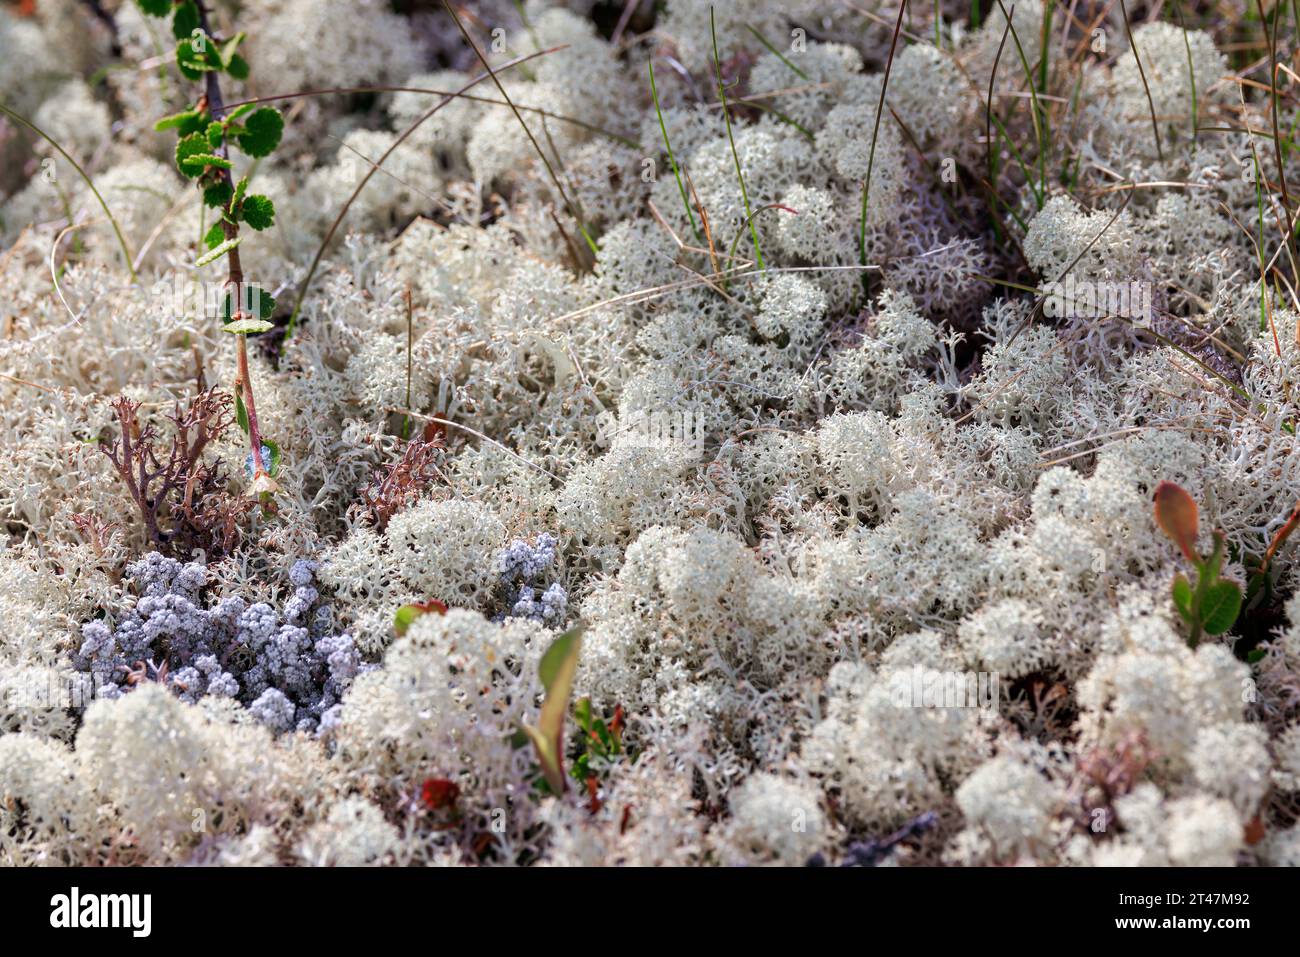 Arctic Tundra lichen moss close-up. Found primarily in areas of Arctic Tundra, alpine tundra, it is extremely cold-hardy. Cladonia rangiferina, also k Stock Photo